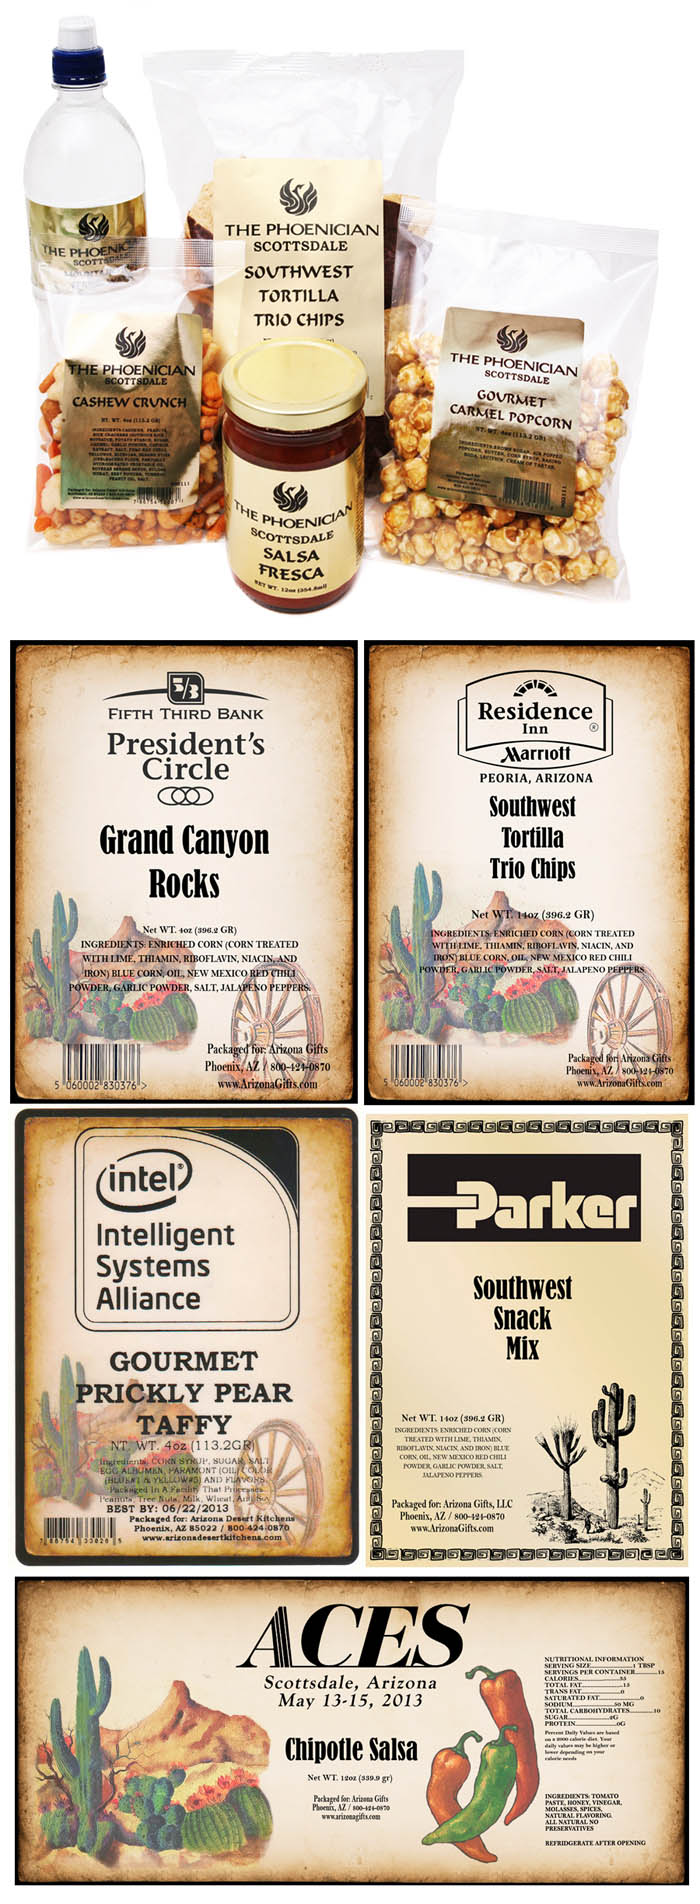 Private Label food, custom labels promotional items